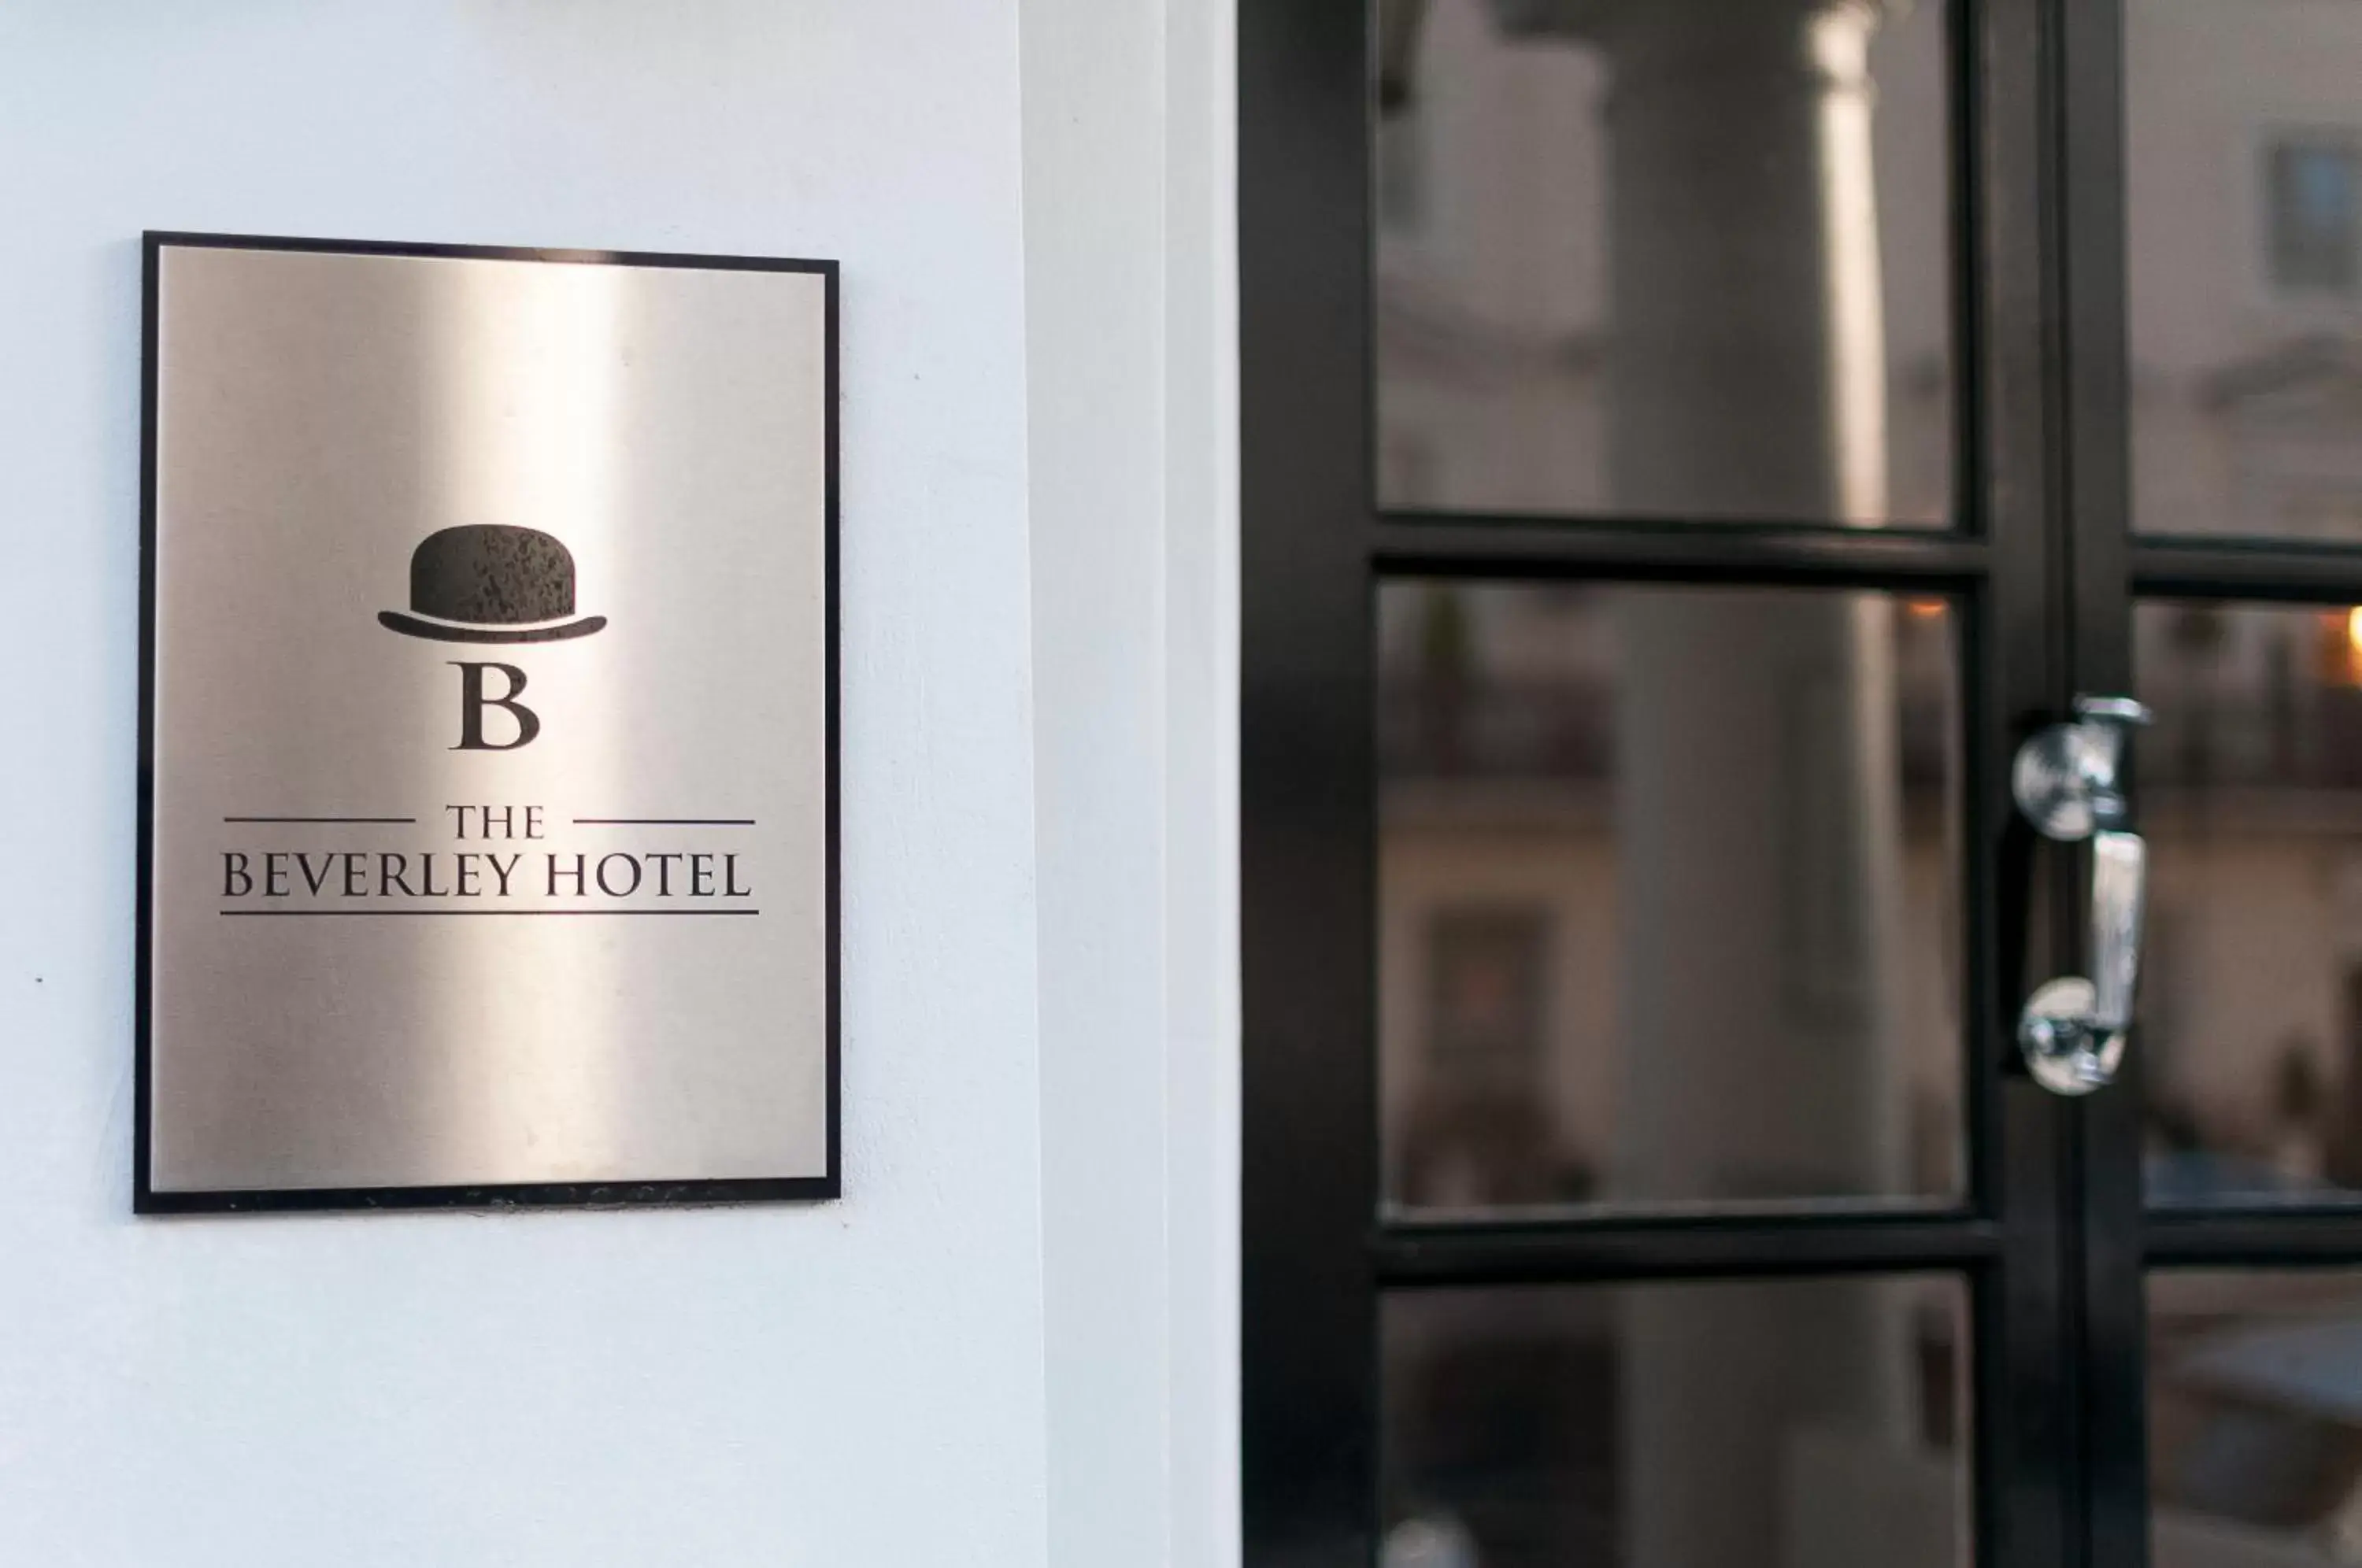 Property logo or sign in The Beverley Hotel London - Victoria